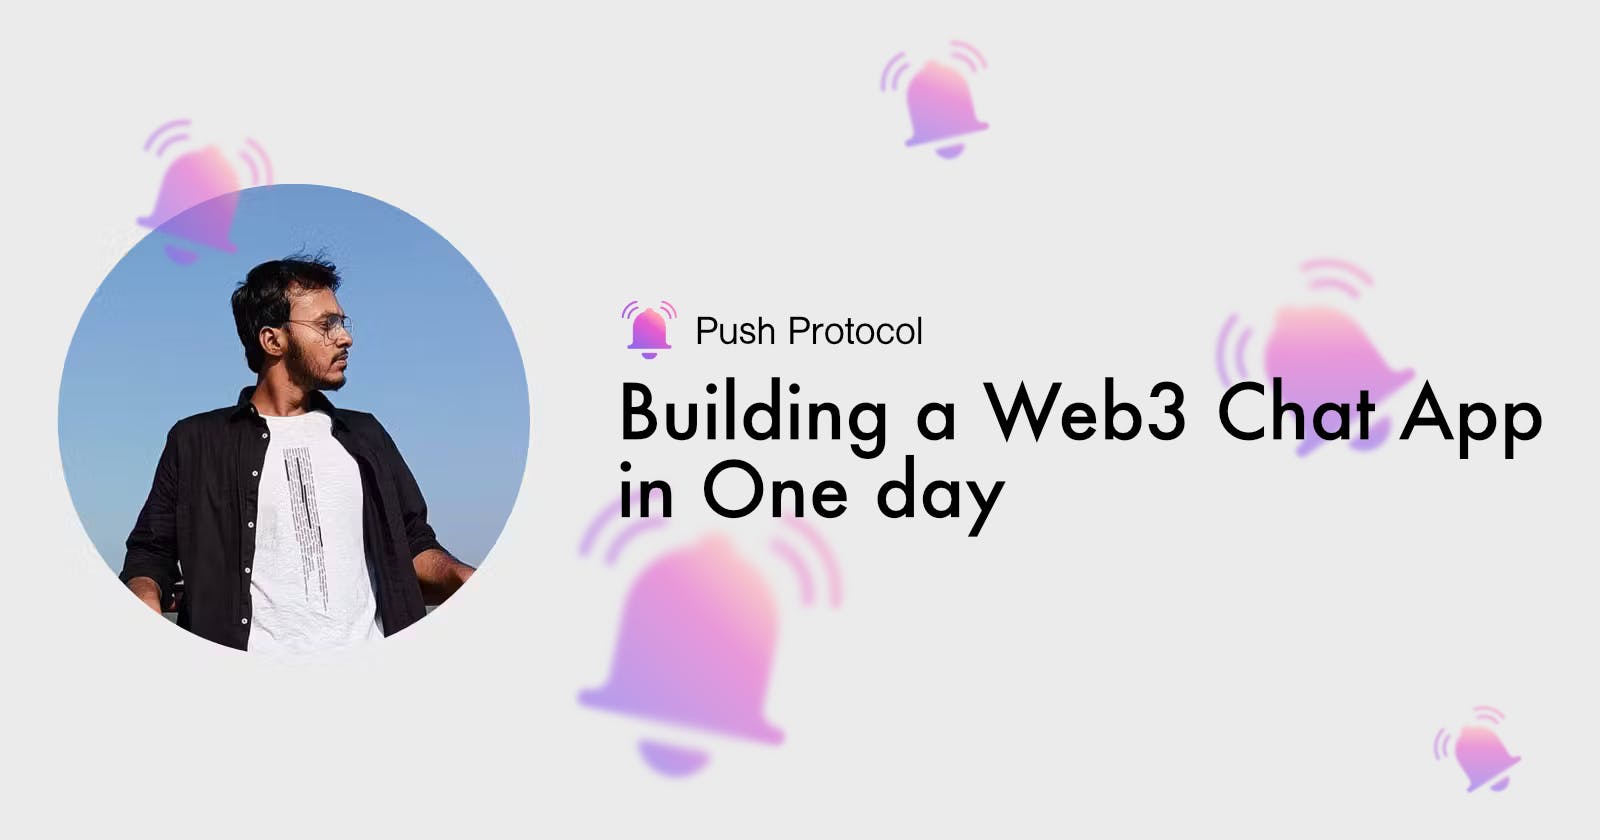 Building a Web3 Chat App in 1 Day Using Push Protocol